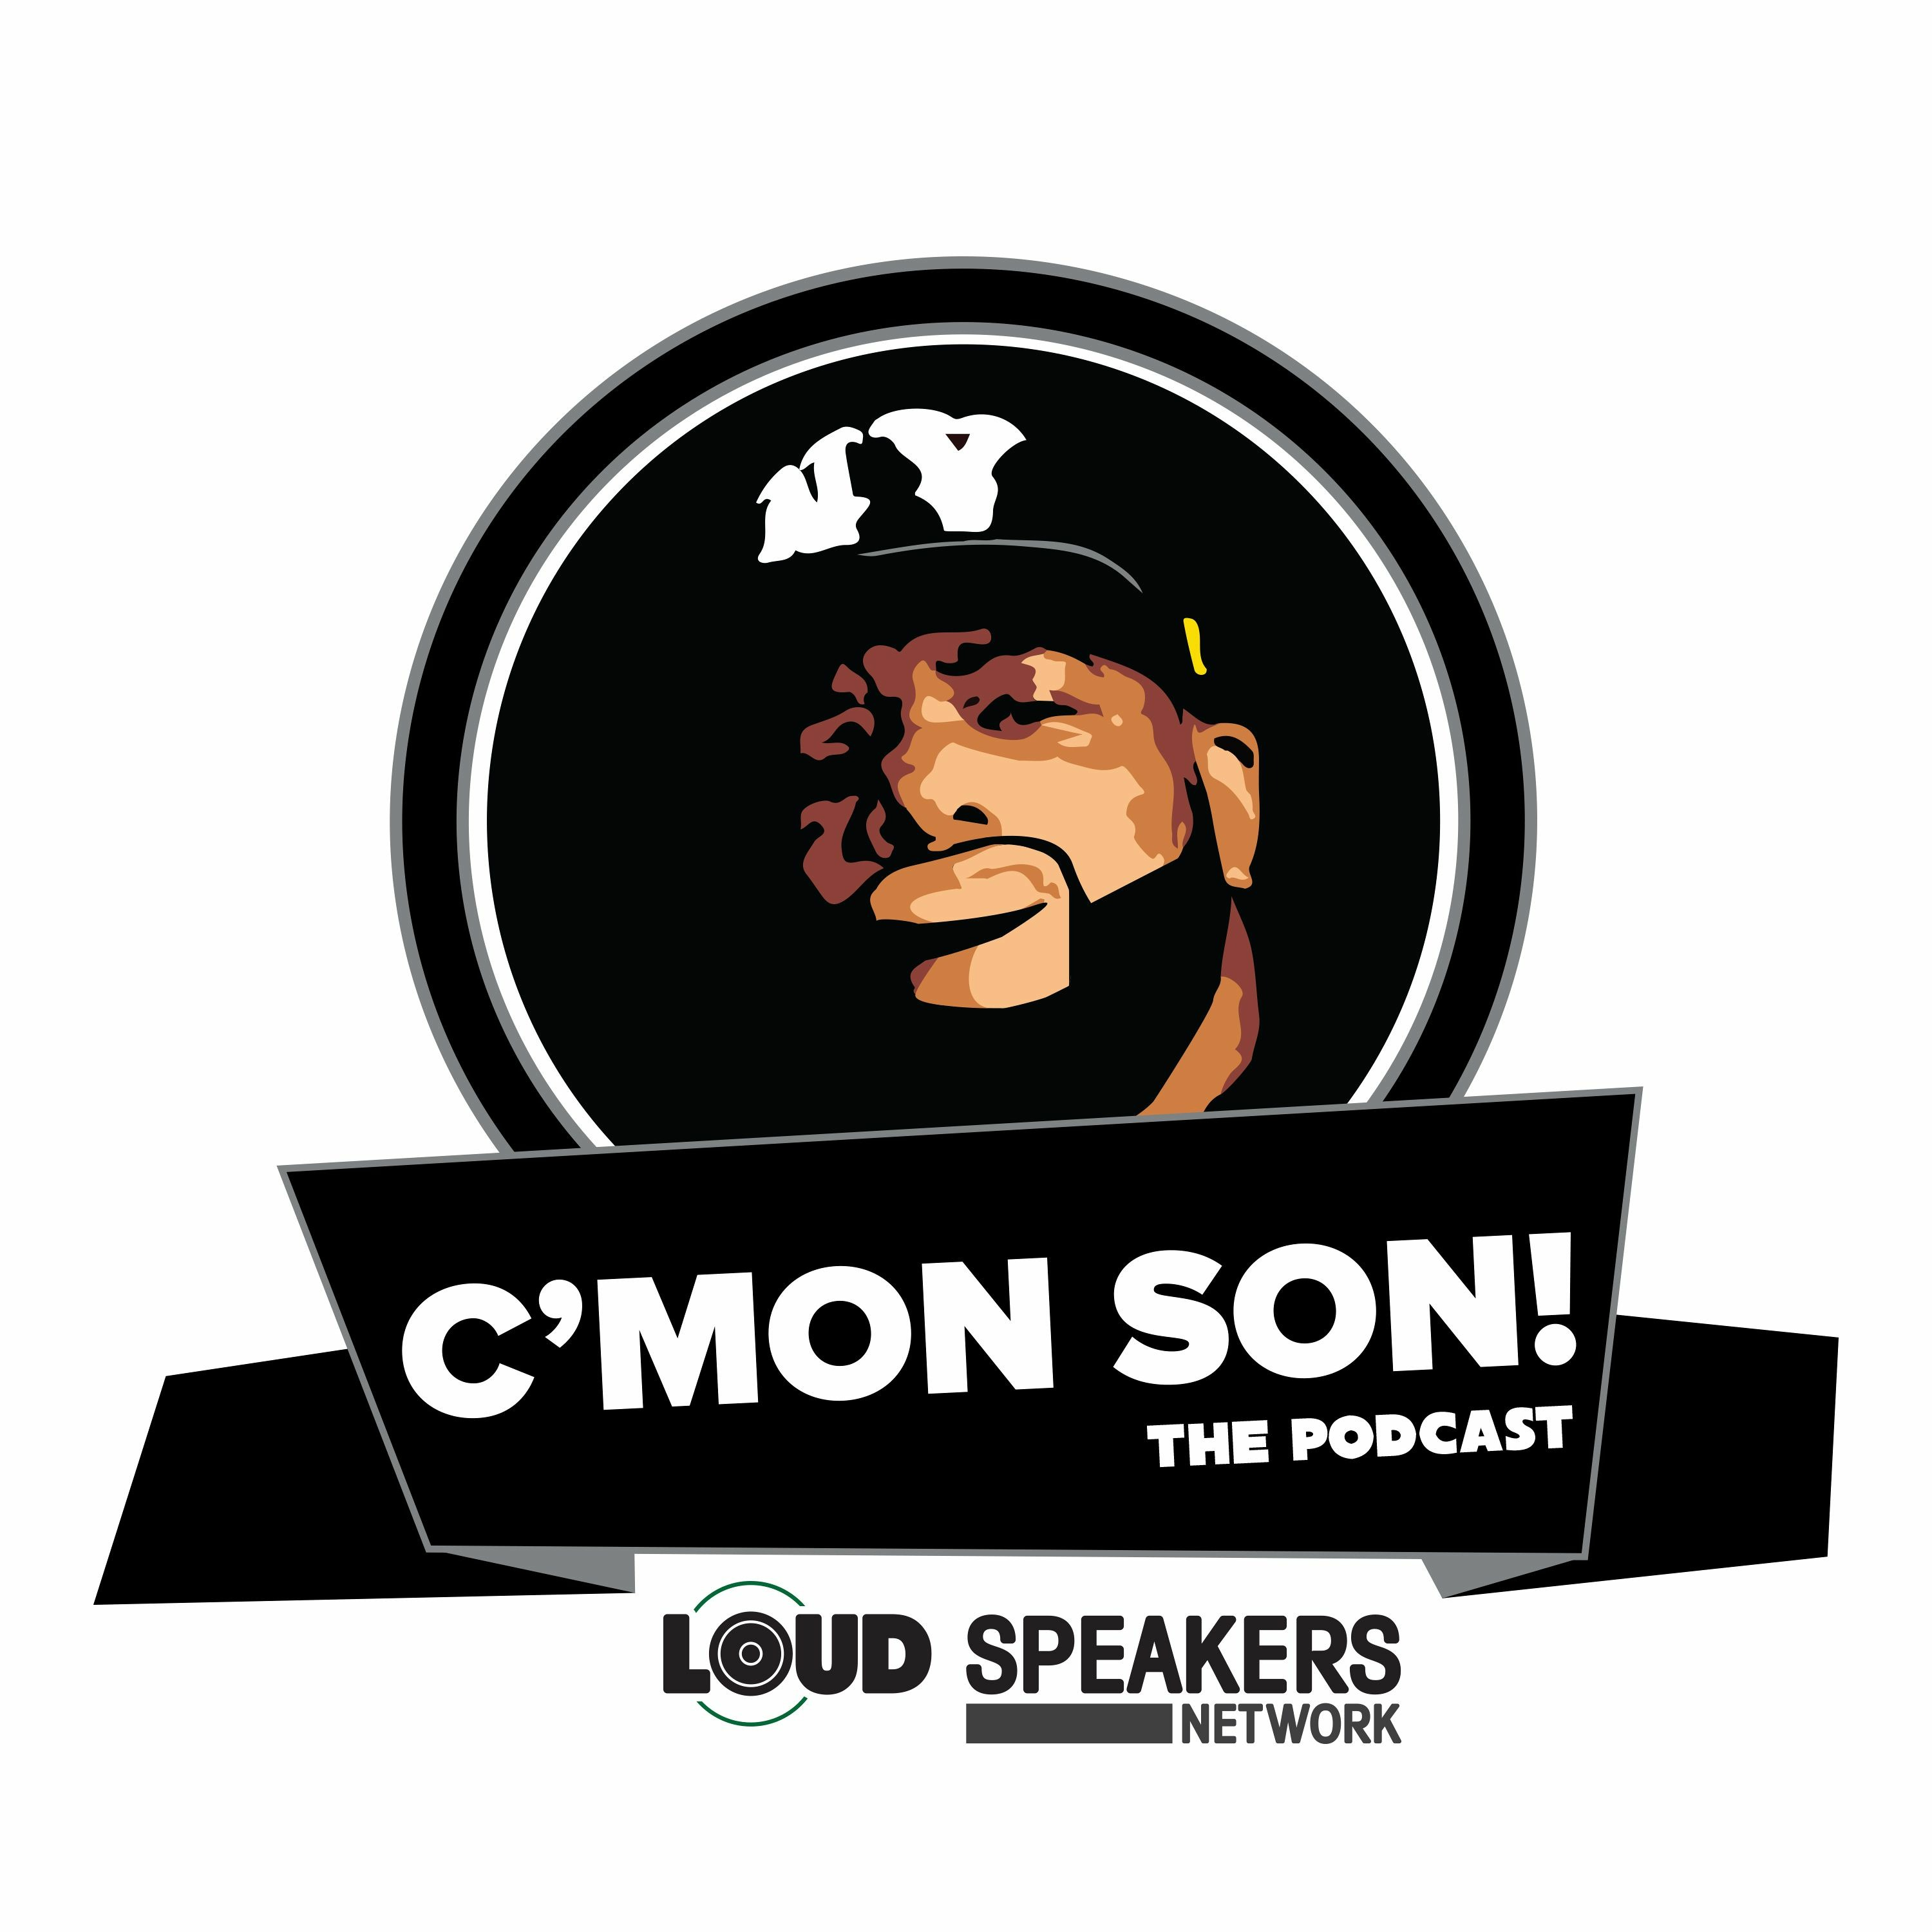 Ep. #183: Game Changers in Music Pt.2 ft. Heavy D, Big Daddy Kane, Outkast, De La Soul and More